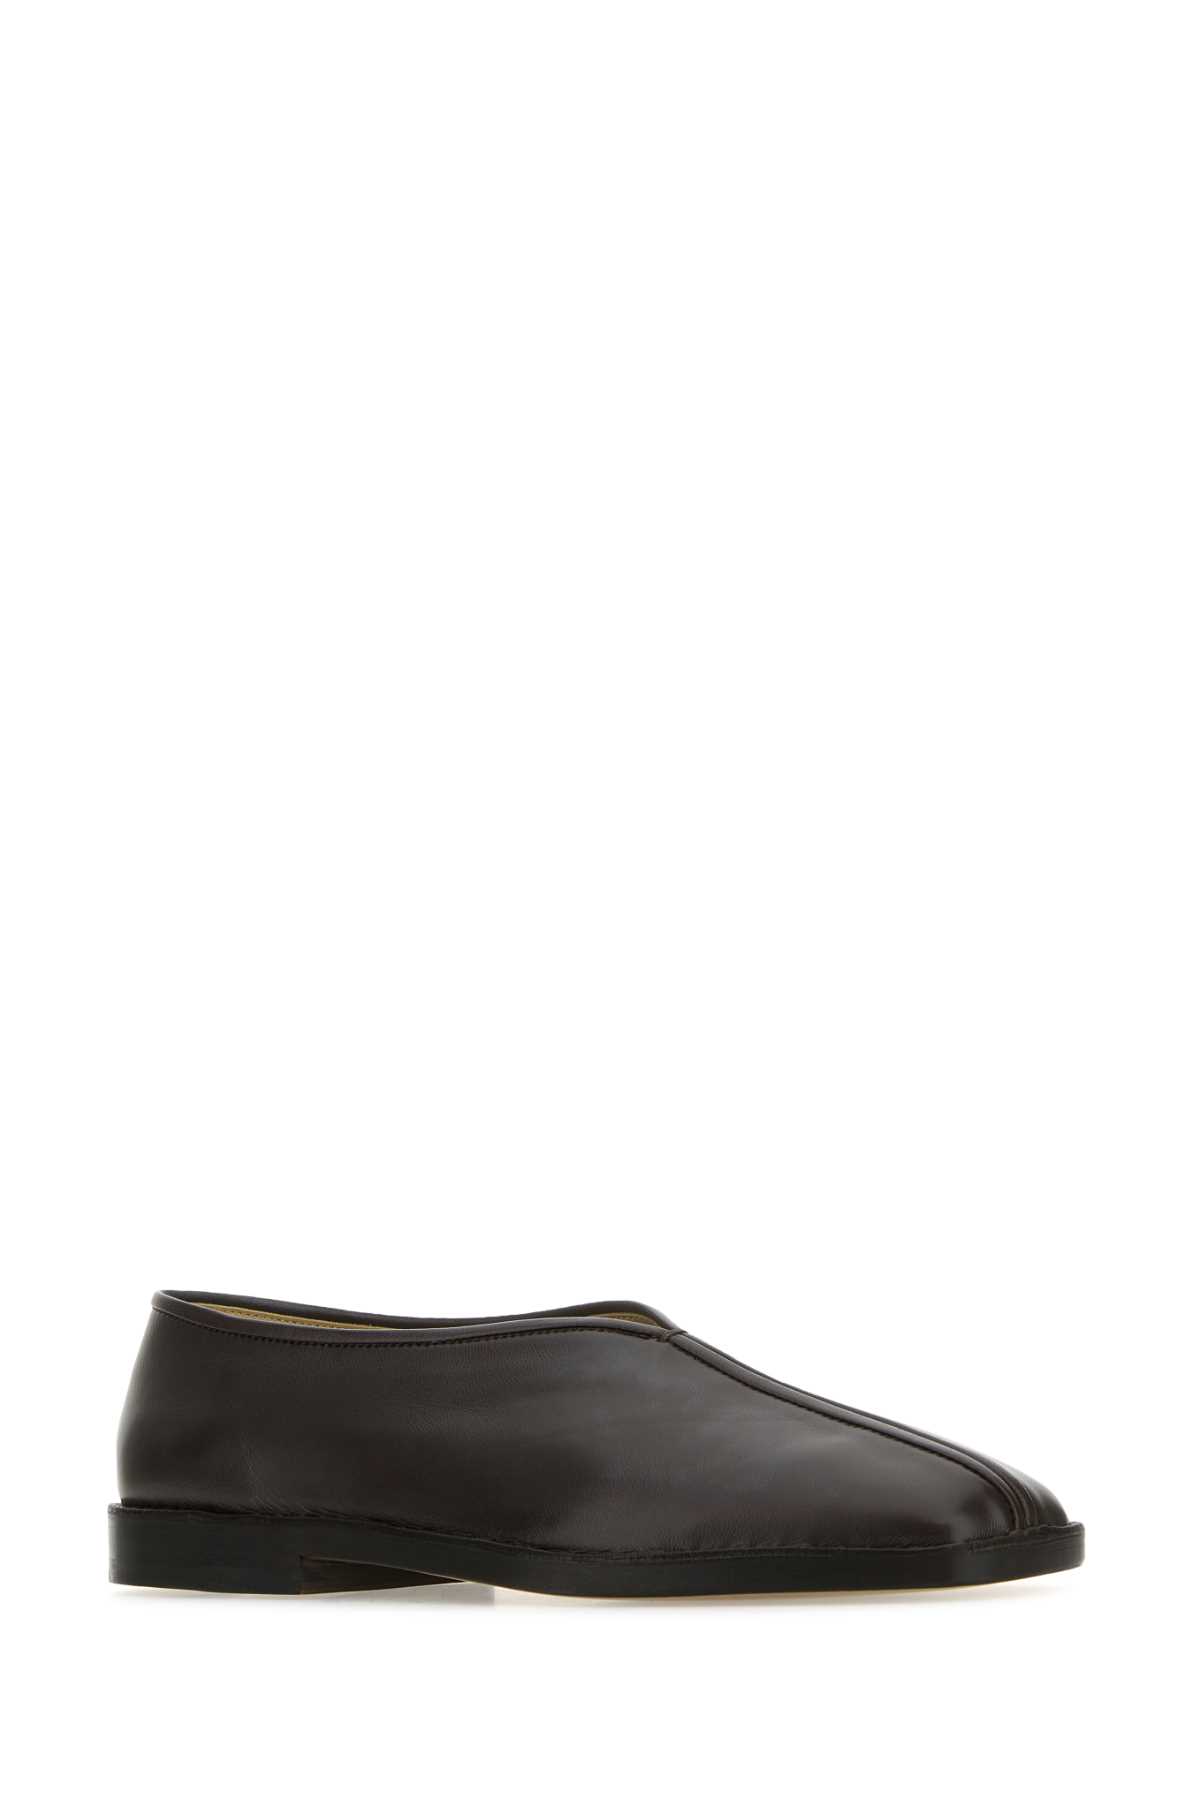 LEMAIRE DARK BROWN LEATHER FLAT PIPED SLIP ONS